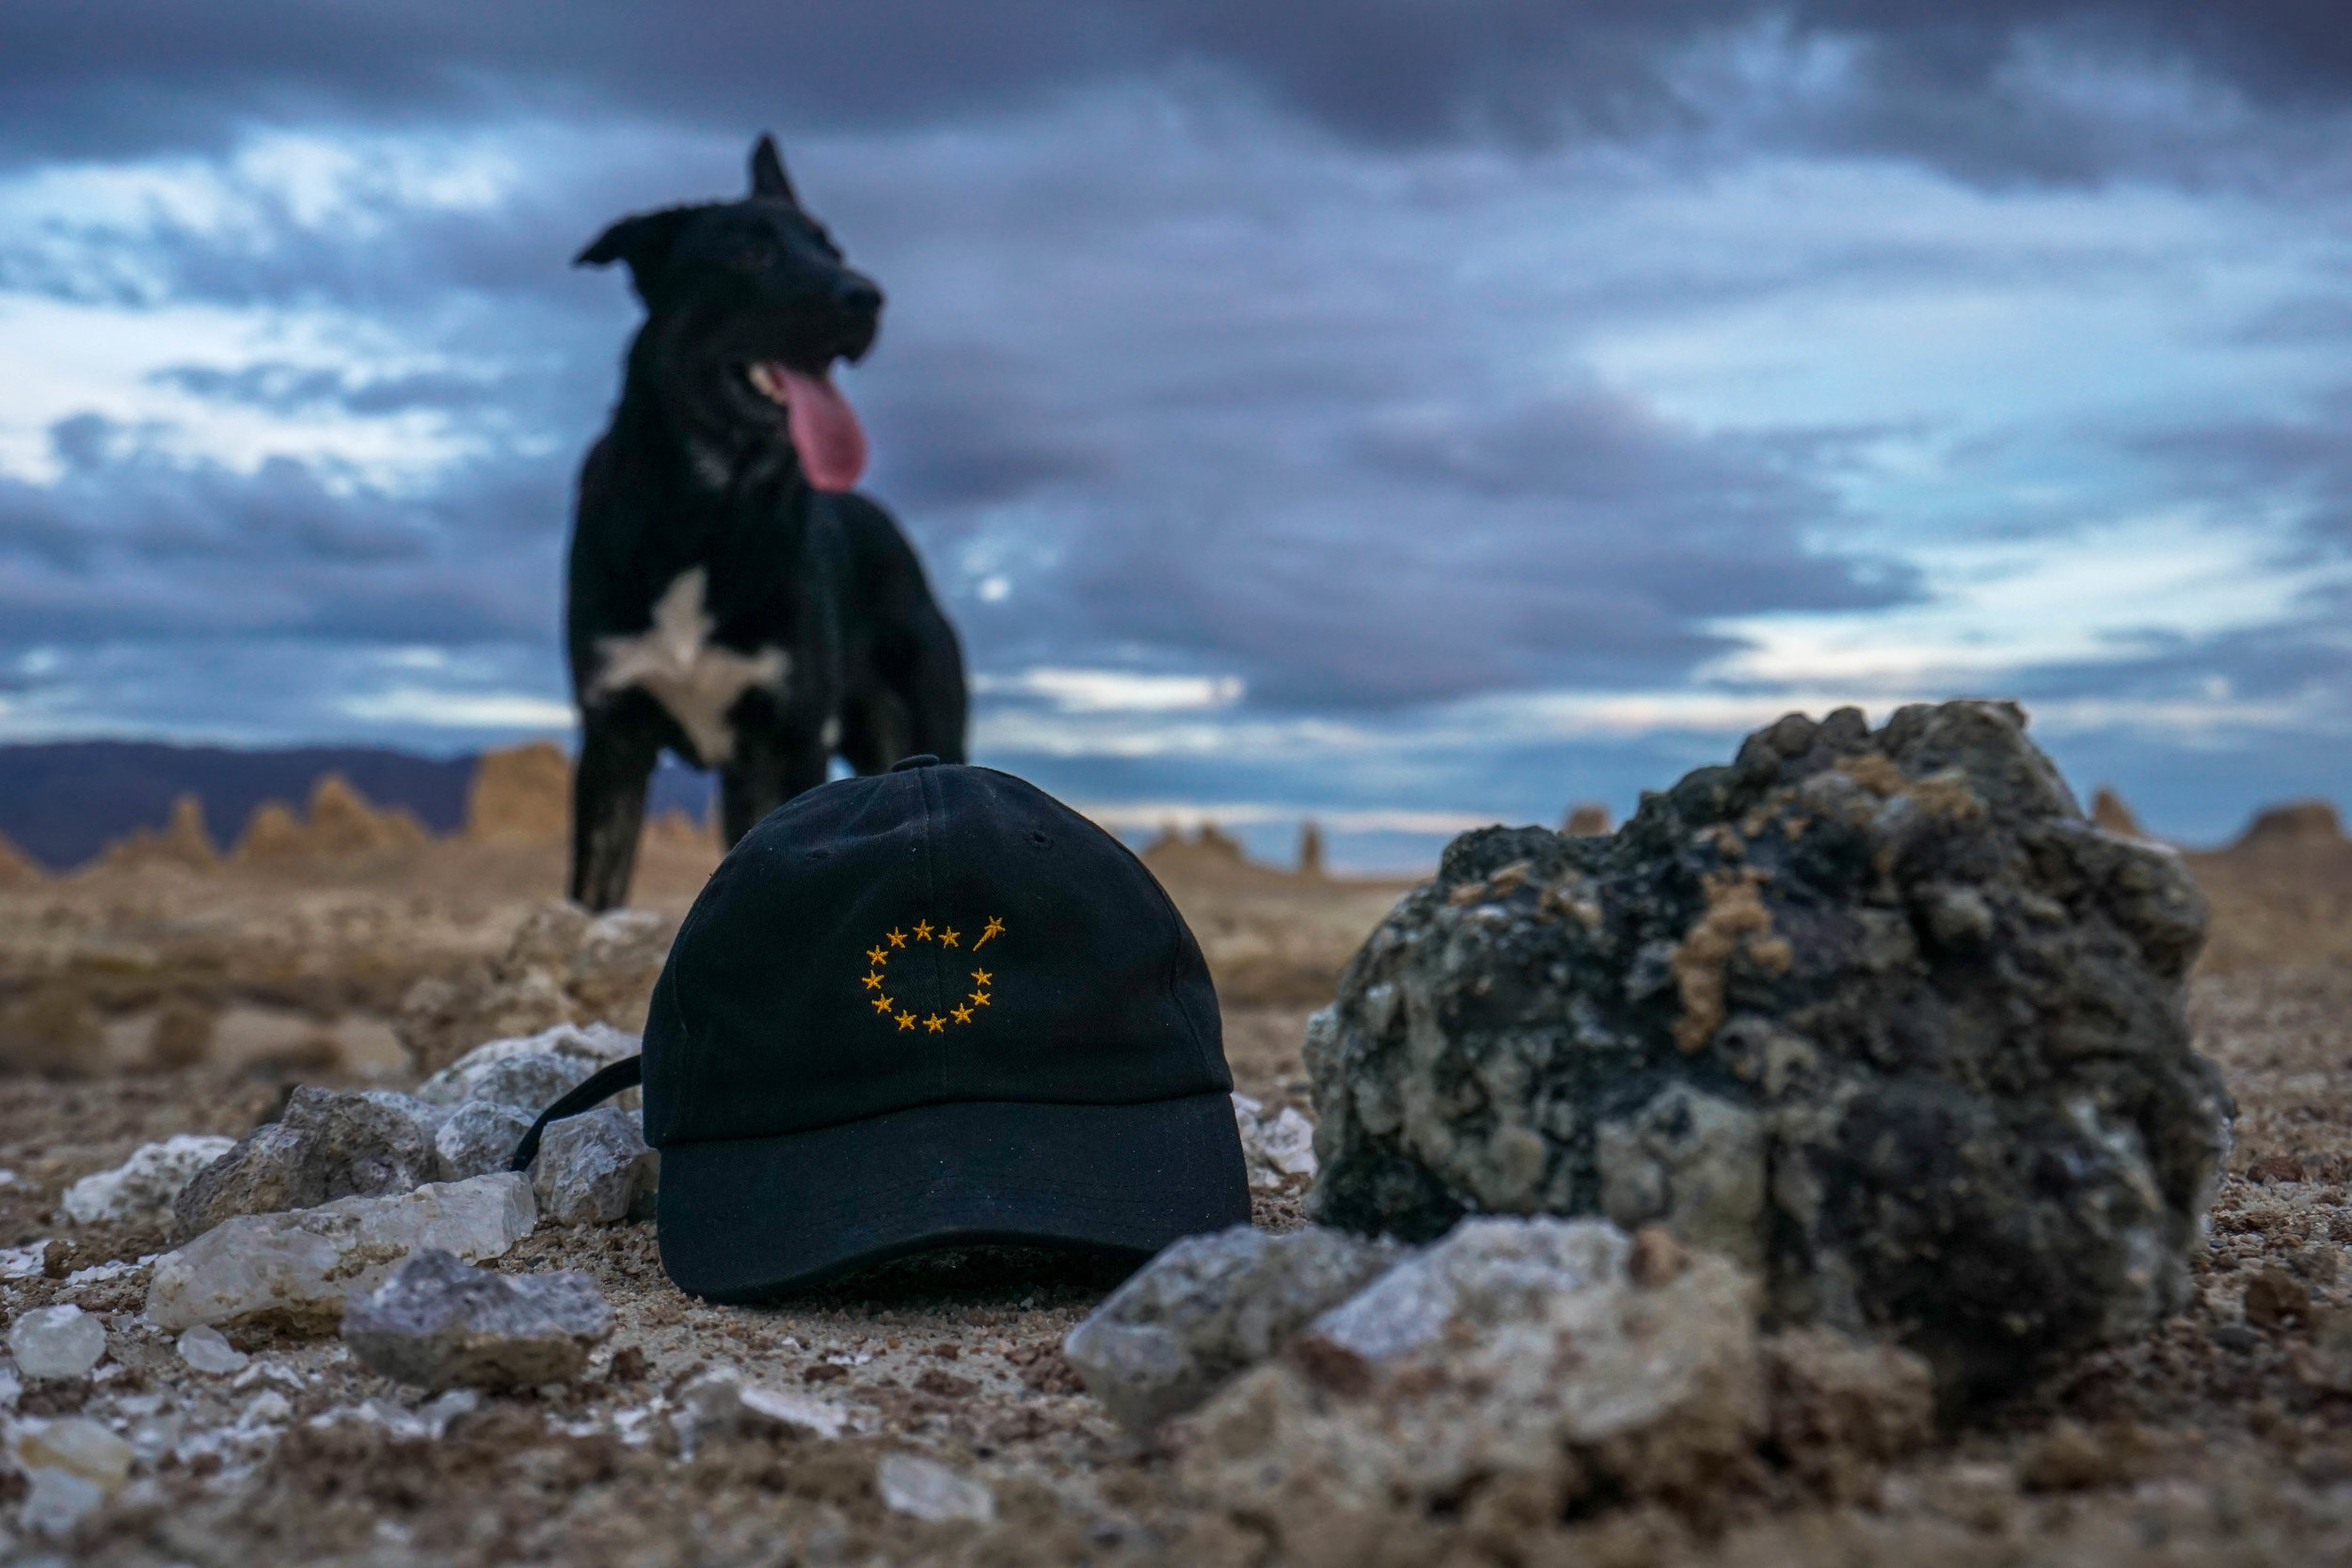 At the bottom we find some rad moonstones to serve as the perfect foreground for a shot of our "Rogue Star" 90's fit cap.